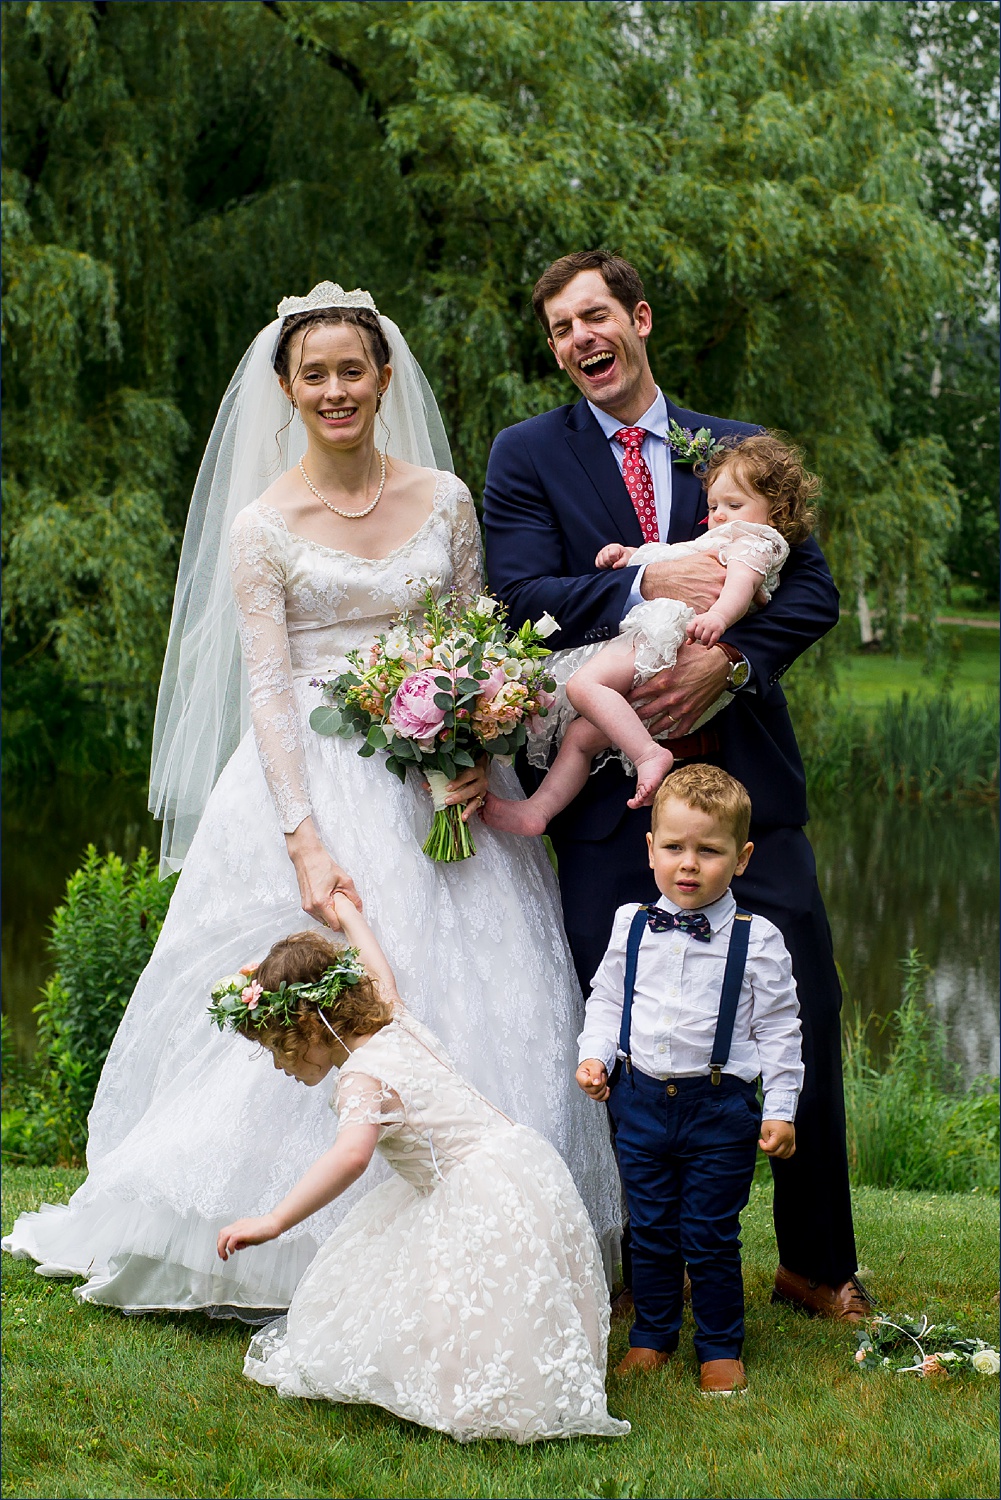 Kids and the wedding day don't always work out perfectly and that's ok